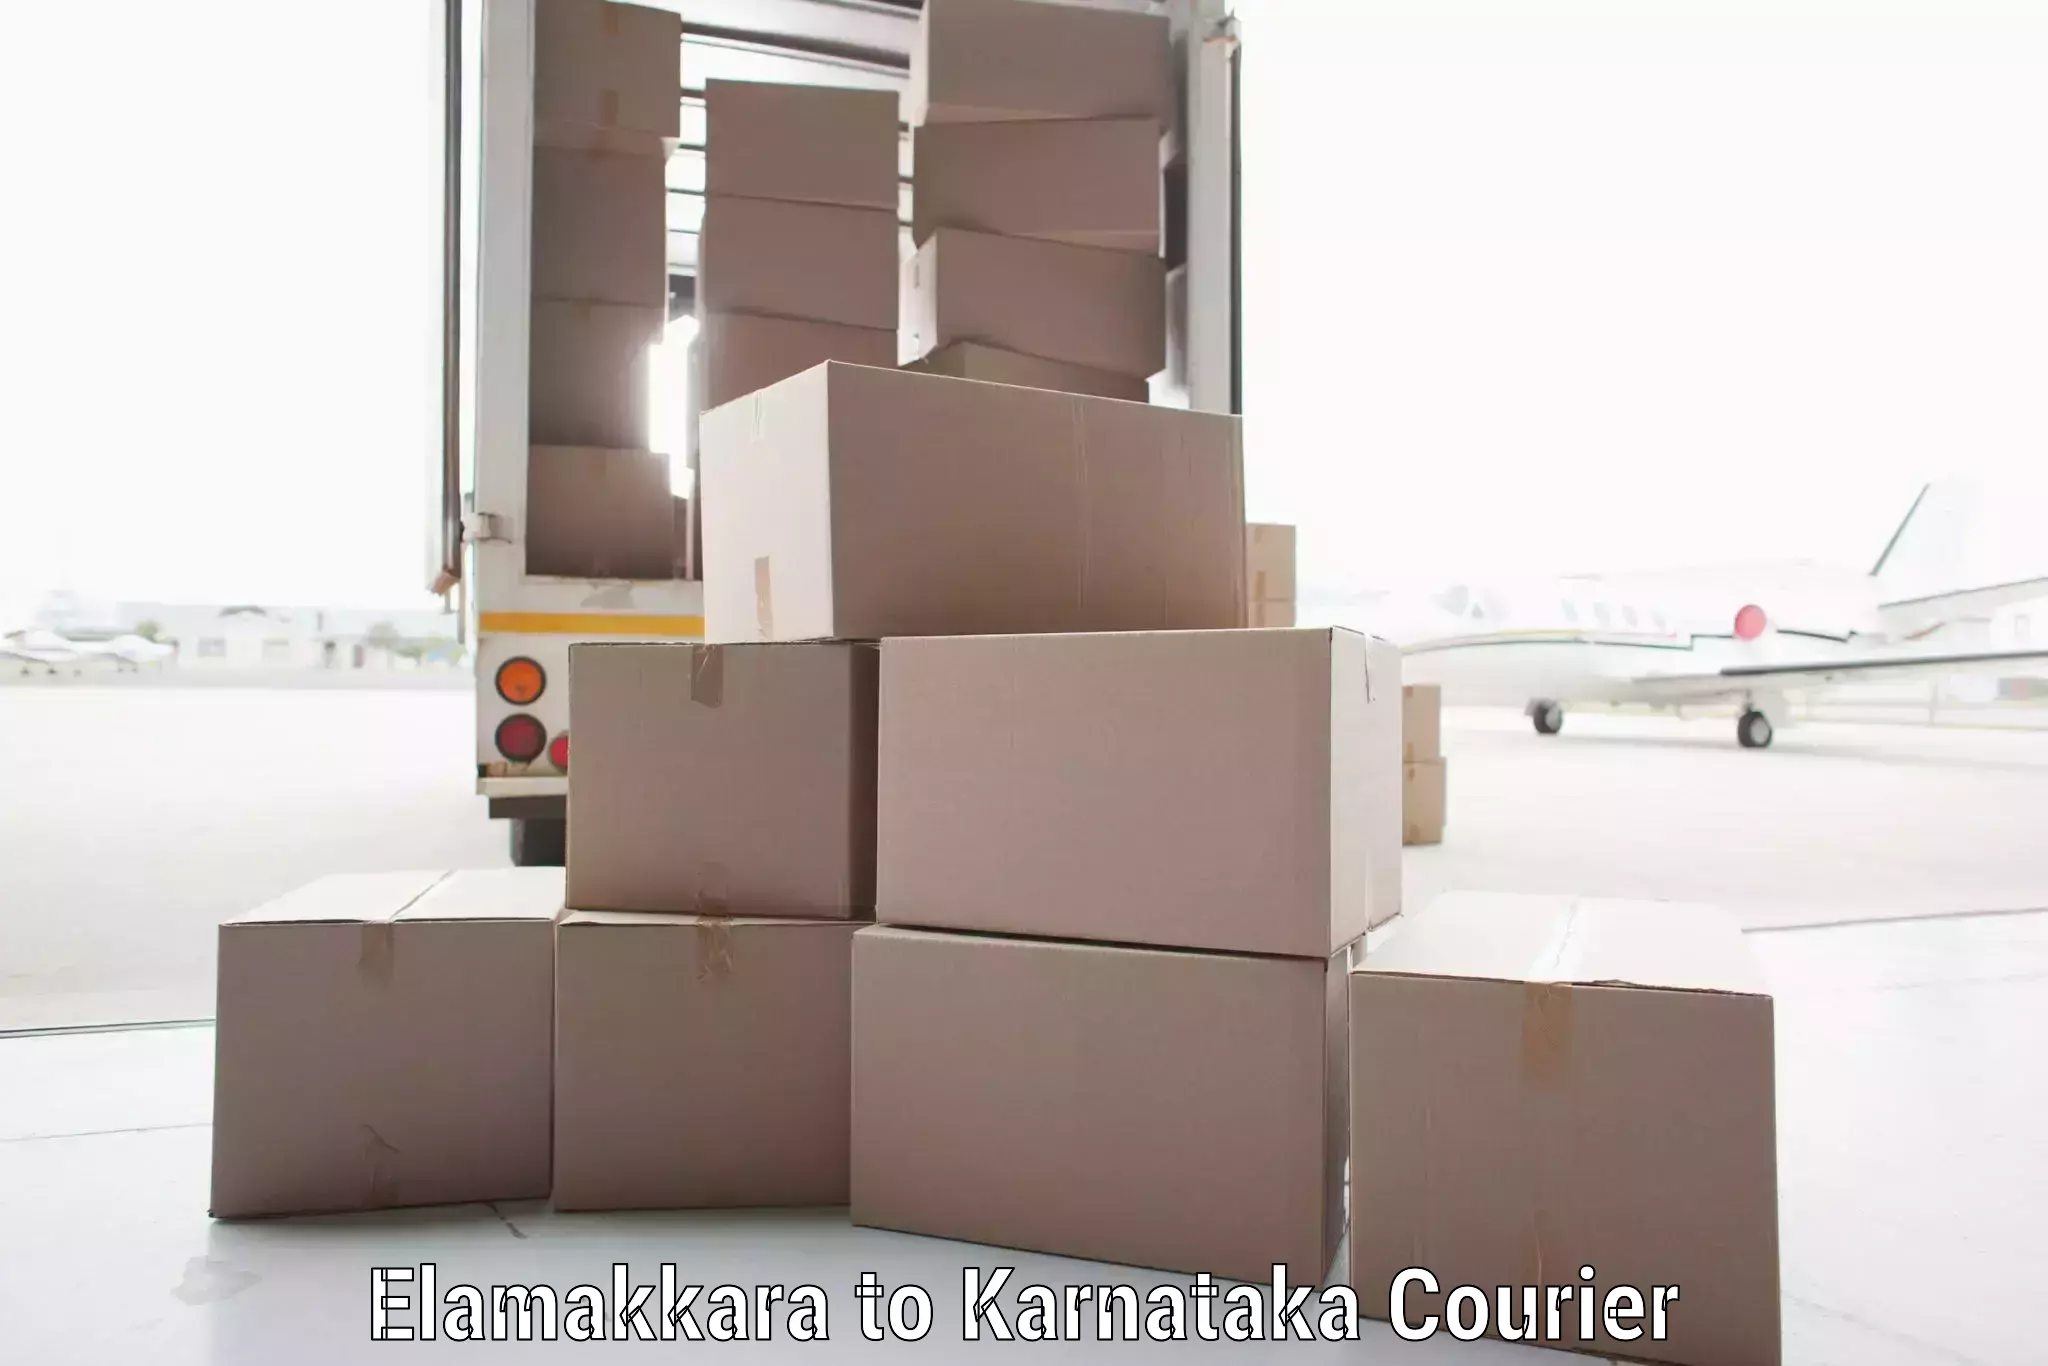 Easy access courier services in Elamakkara to Dharmasthala